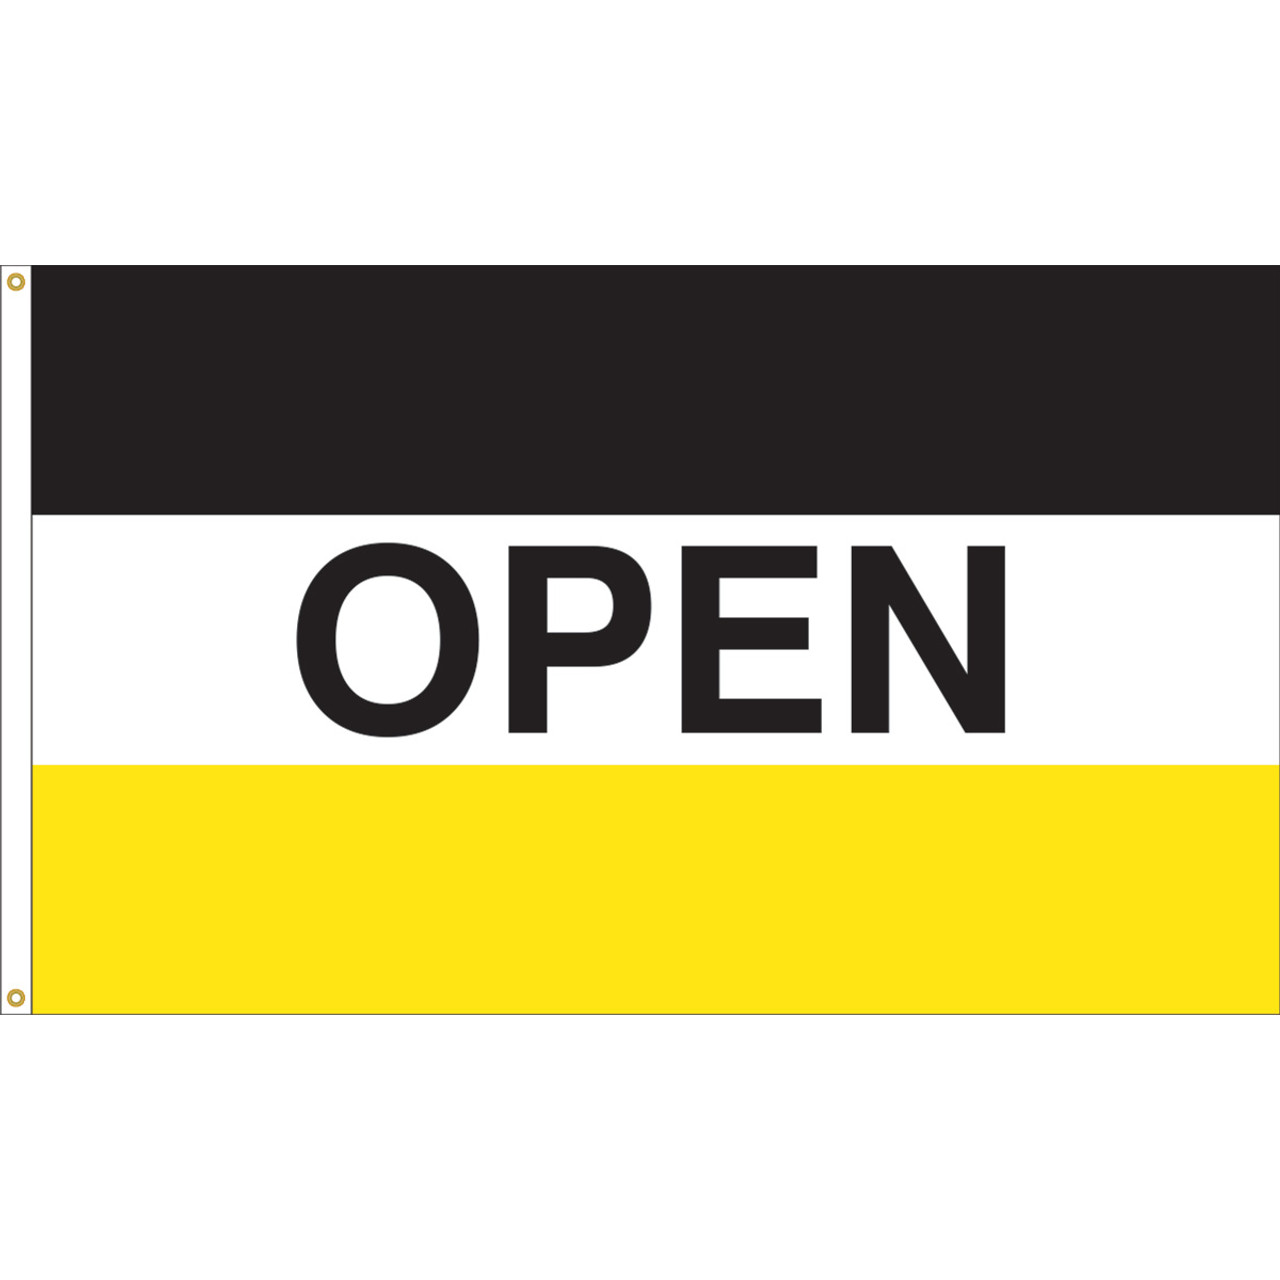 x 5' OPEN Black/White/Yellow Flag | American Flags Express